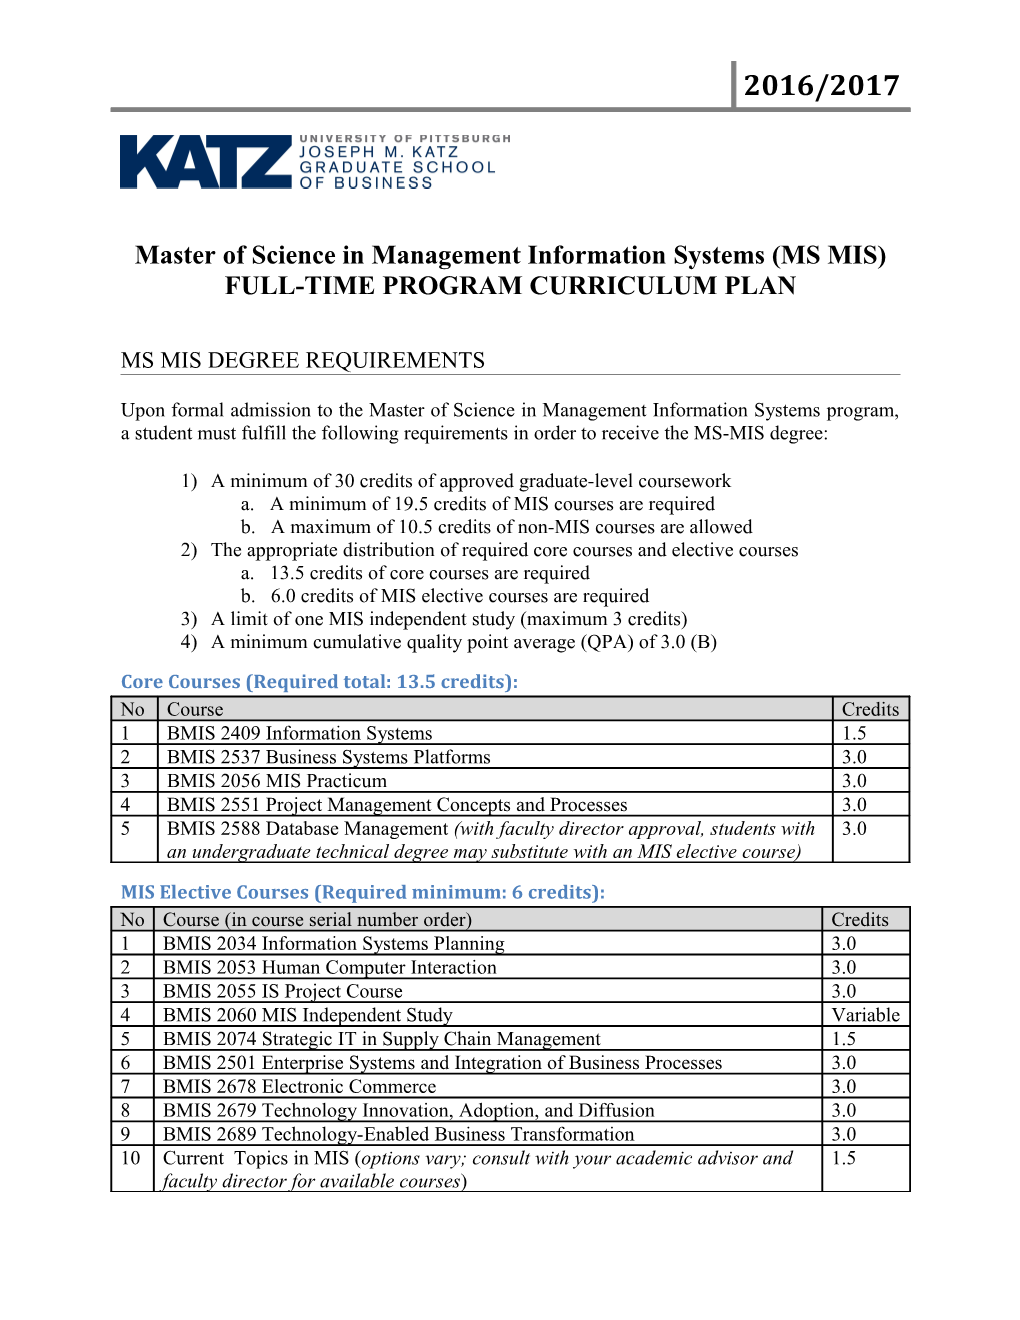 Master of Science in Management Information Systems (MS MIS) FULL-TIME PROGRAM CURRICULUM PLAN